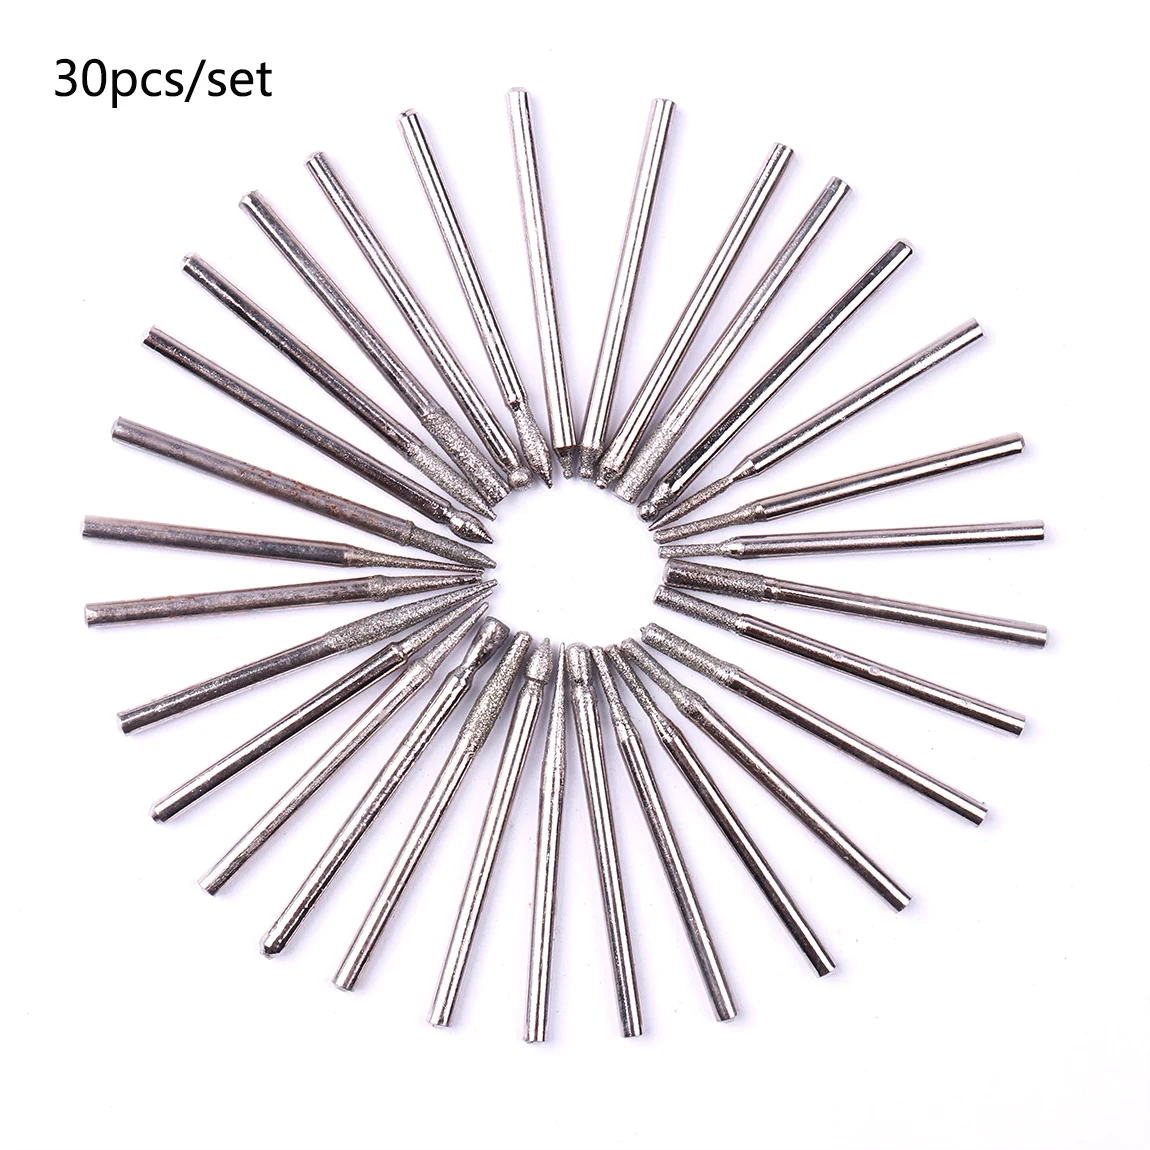 CHEERBRIGHT 30Pc Diamond Coated Cuticle Removal Nail Drill Set Rotary Grinding Burrs Glass Drill Bit DIYTool Set цена и фото